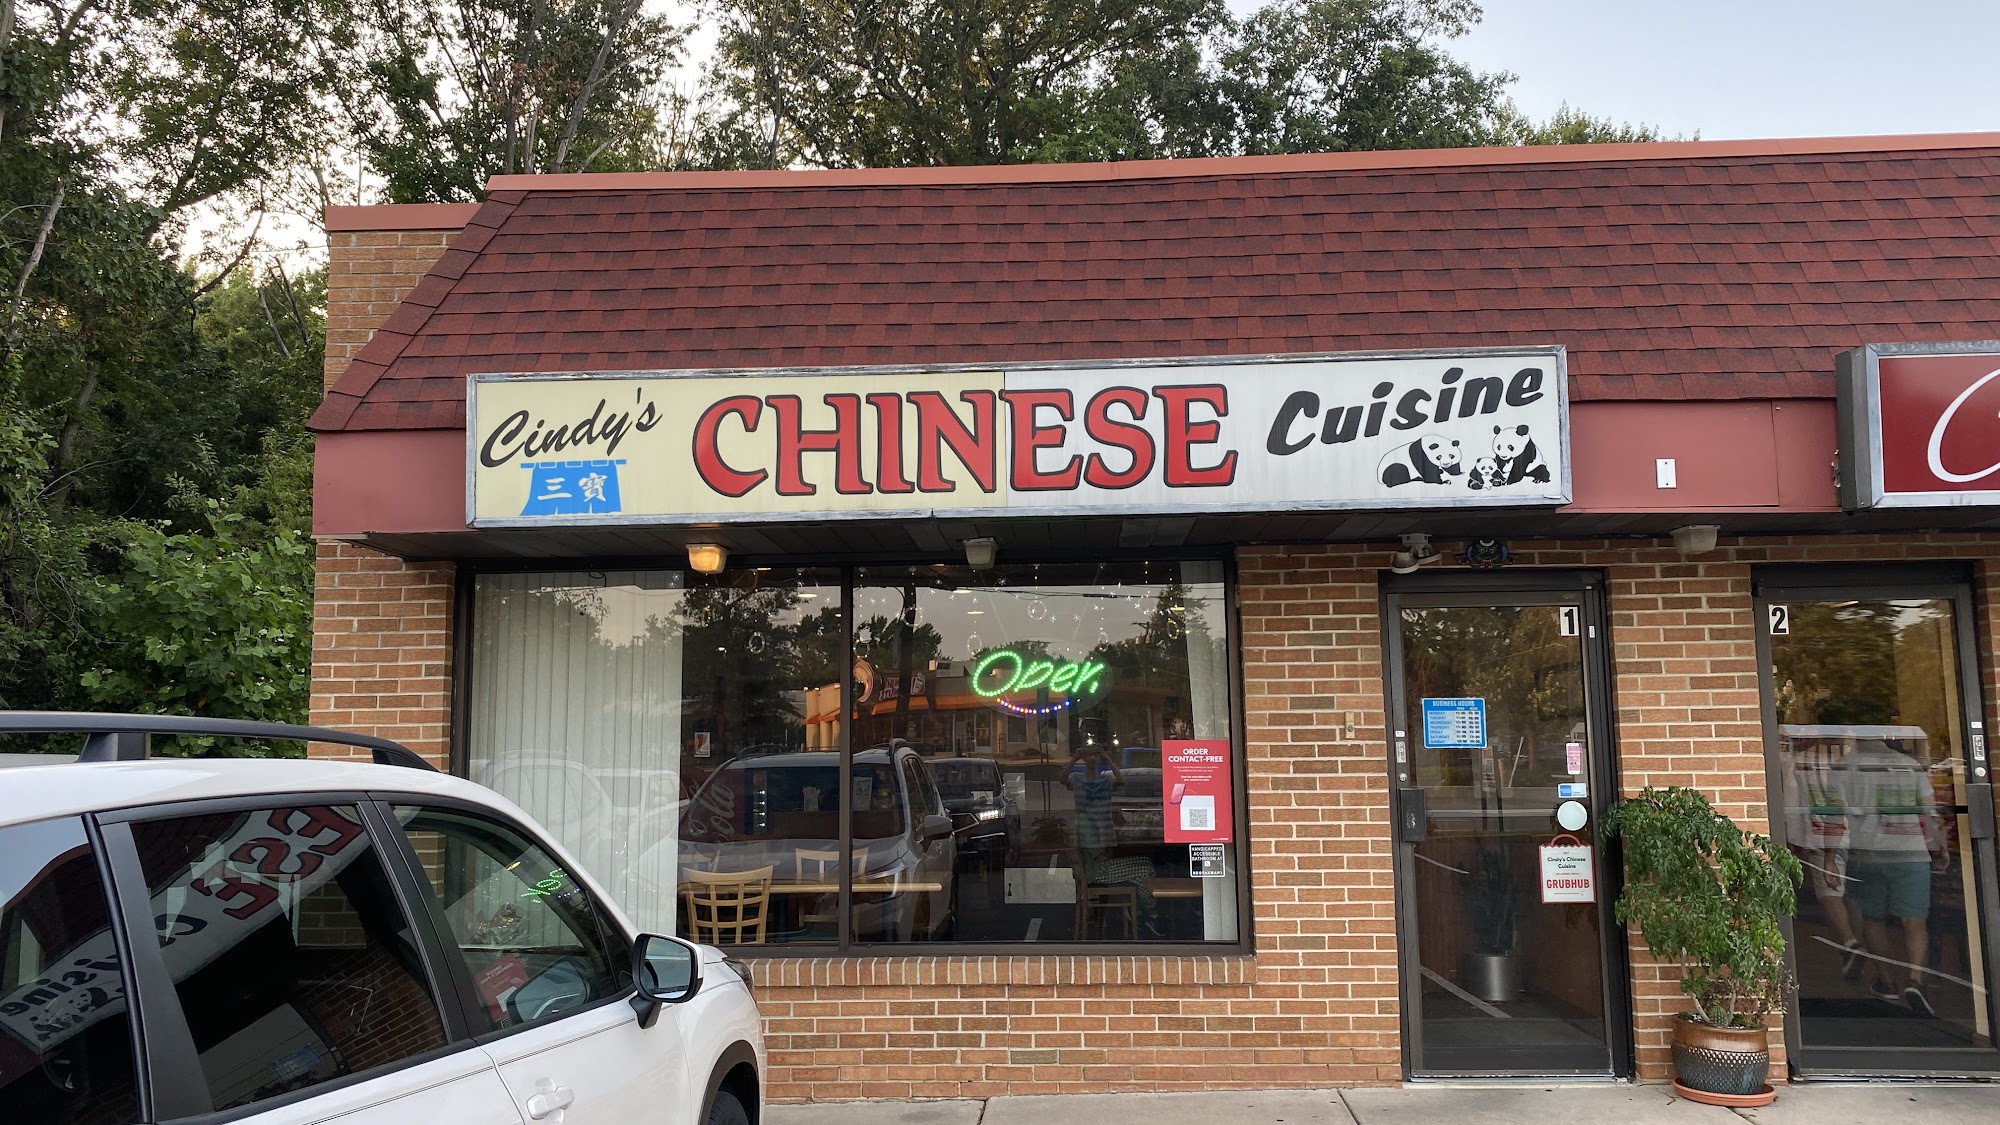 Cindy’s Chinese Restaurant